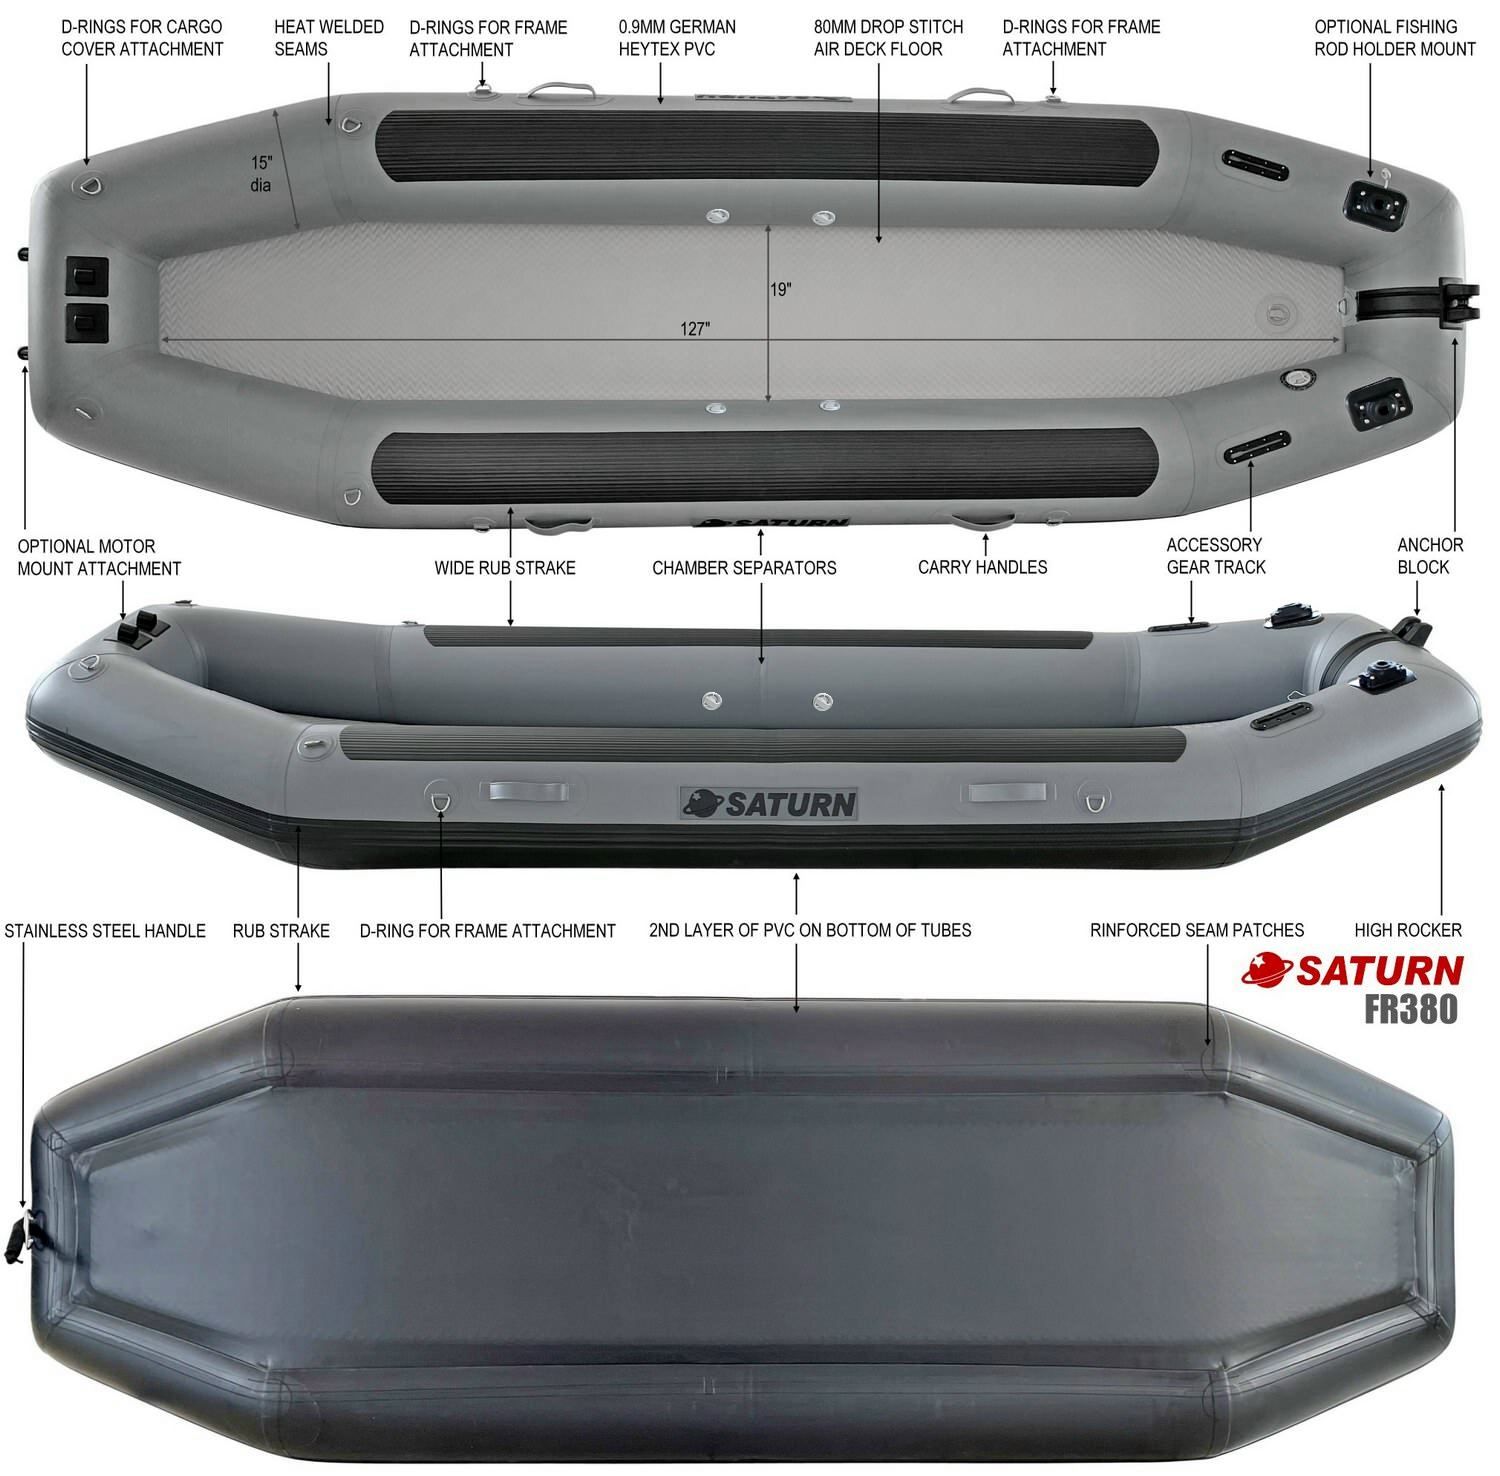 Saturn Inflatable Fly Fishing Raft FR380 V2 Specs.